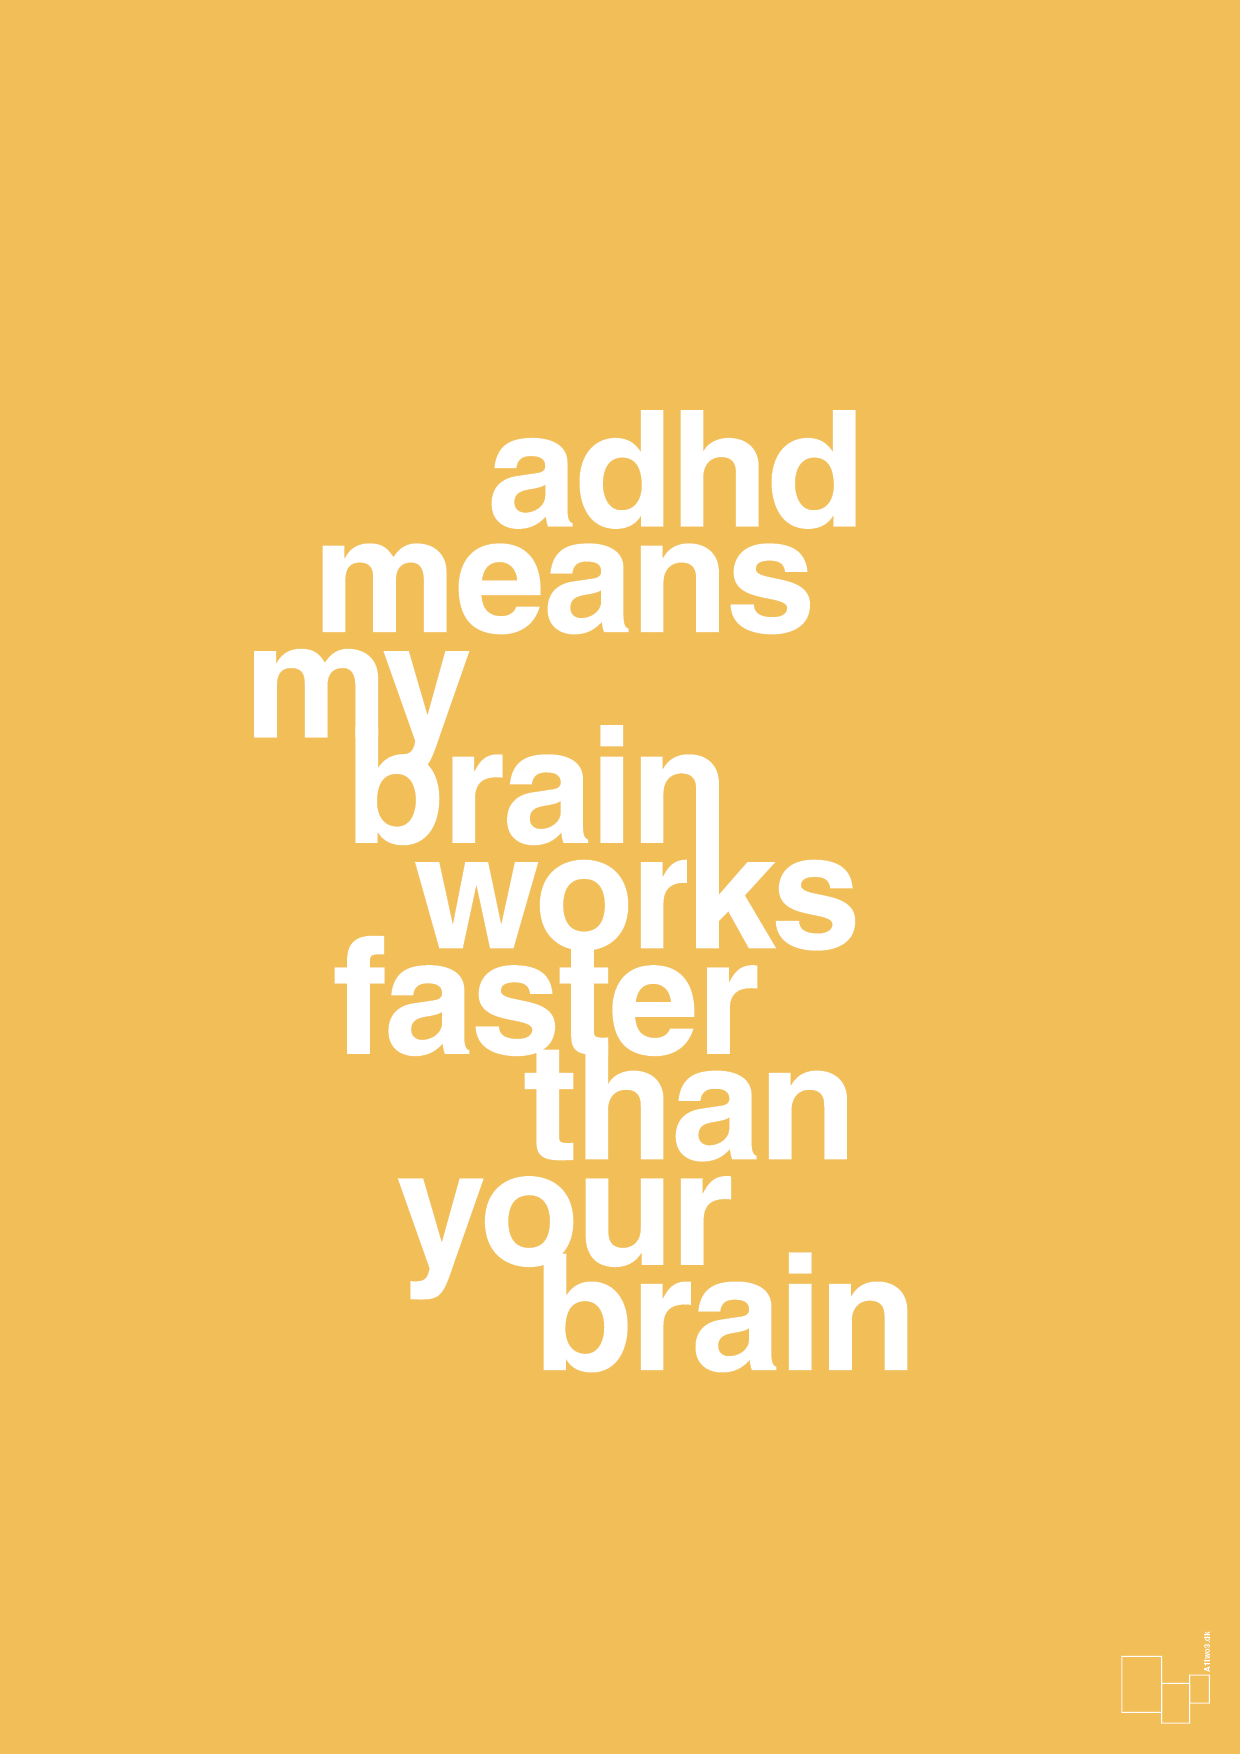 adhd means my brain works faster than your brain - Plakat med Samfund i Honeycomb